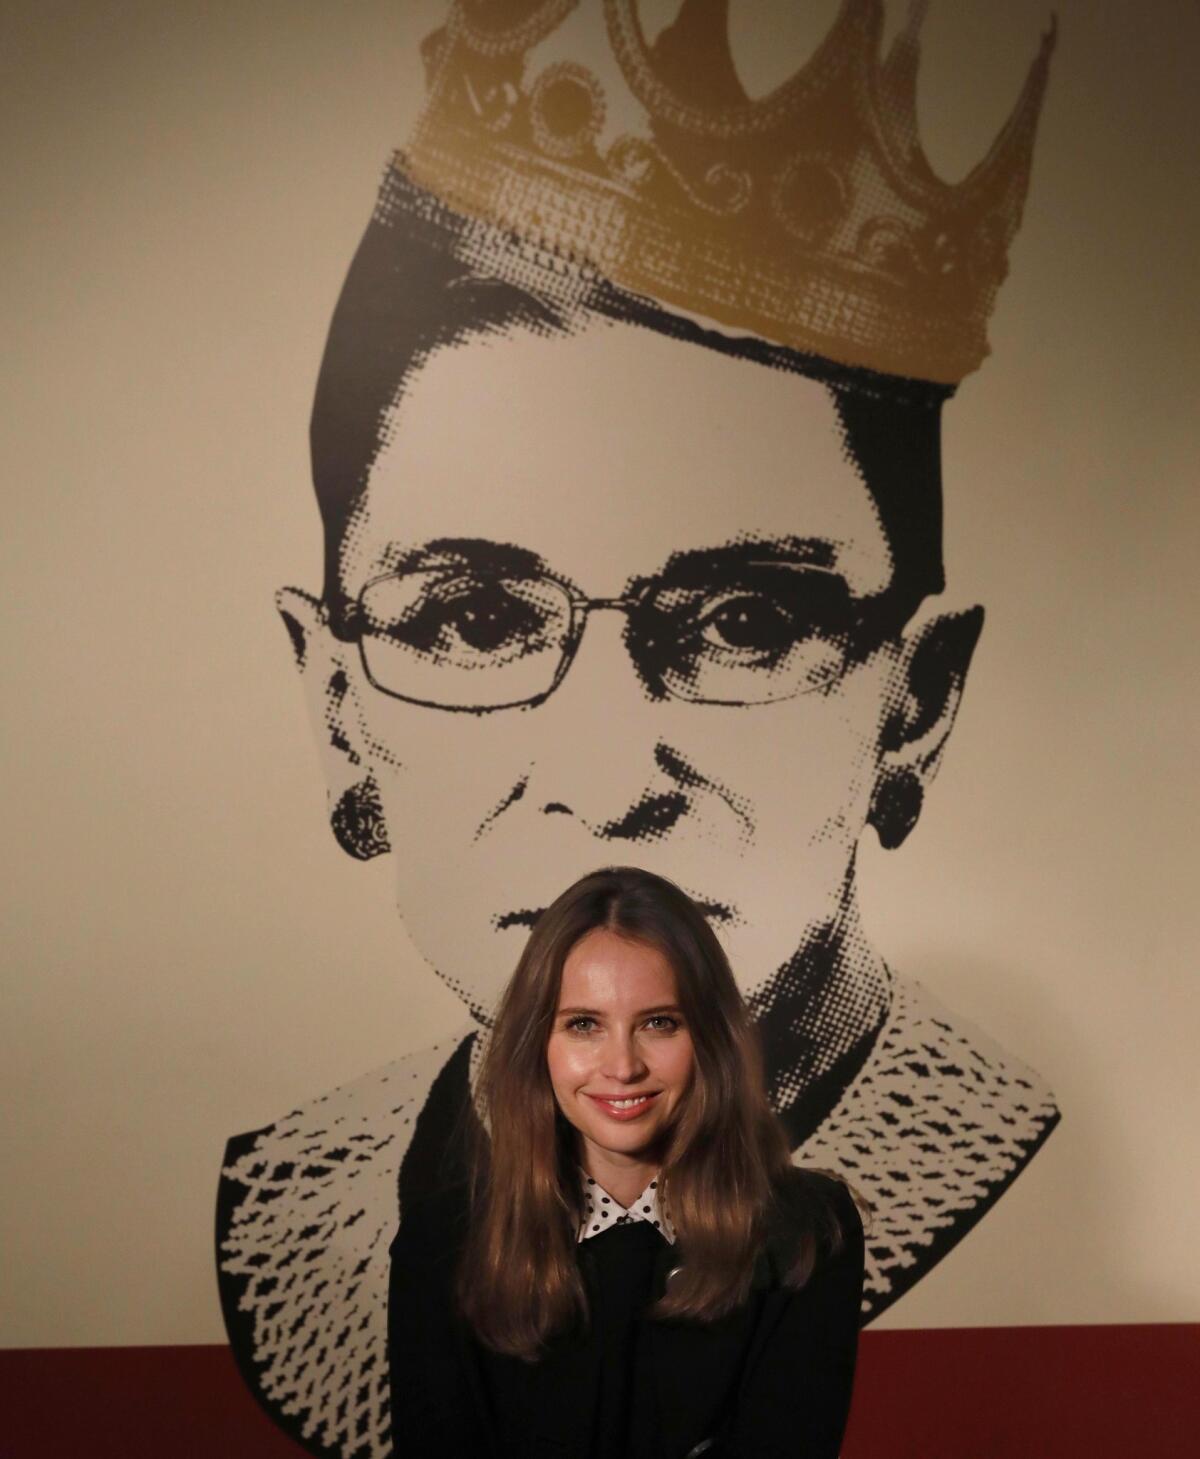 Academy Award-nominated actor Felicity Jones poses in front of an image of Justice Ruth Bader Ginsburg at the exhibit, "Notorious RBG, The Life and Times of Ruth Bader Ginsburg," at the Skirball Cultural Center in Los Angeles.